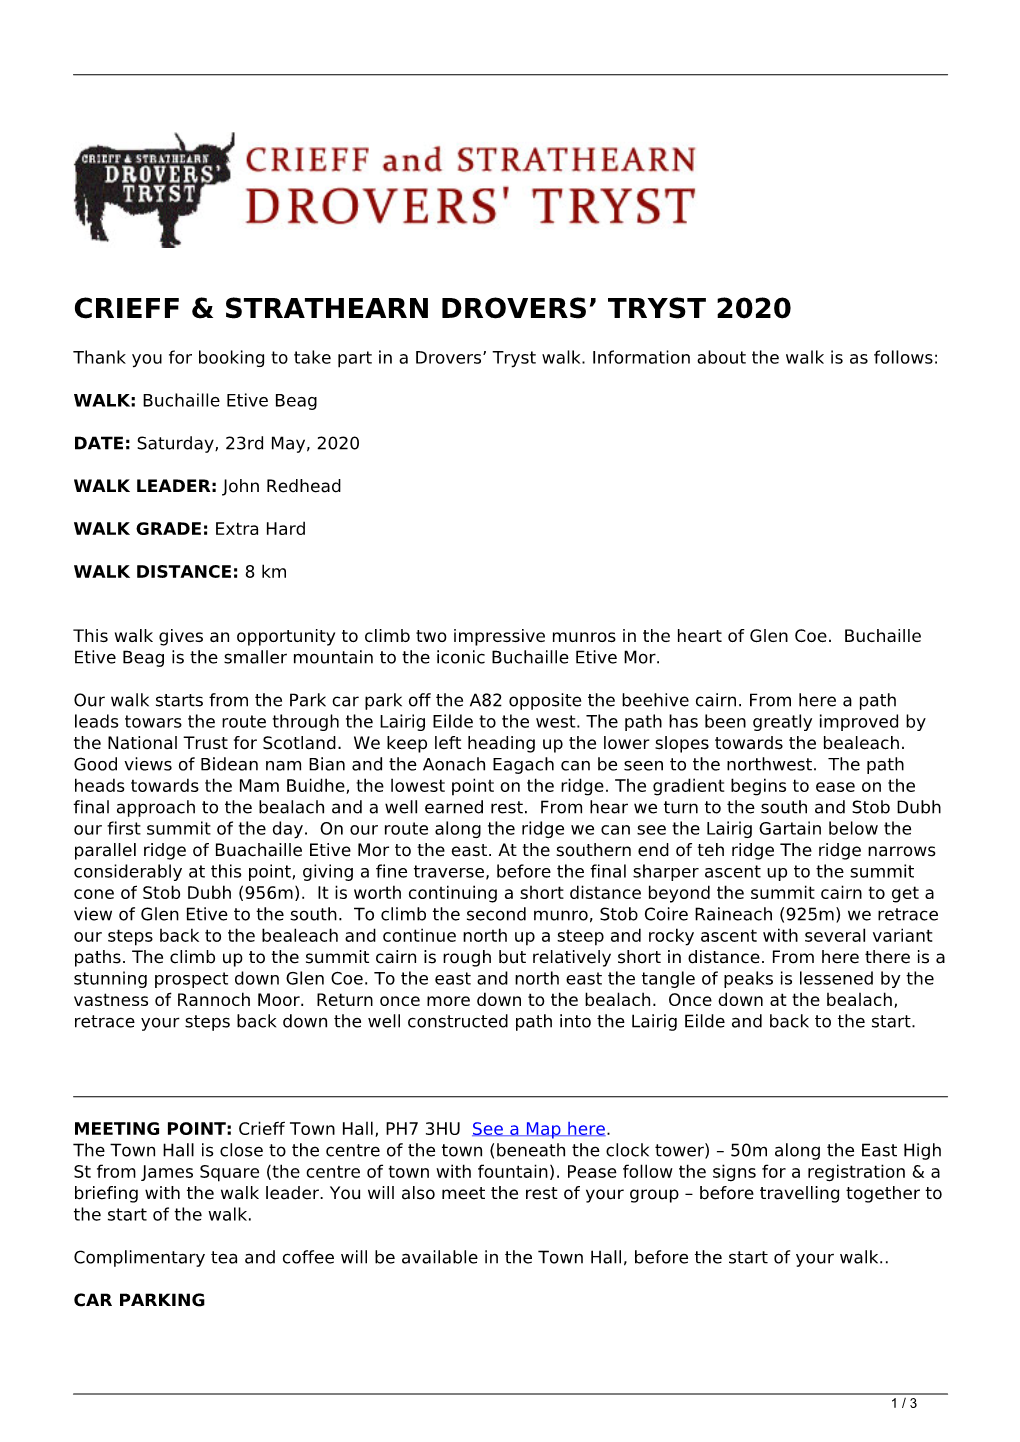 Drovers' Tryst Information Sheet